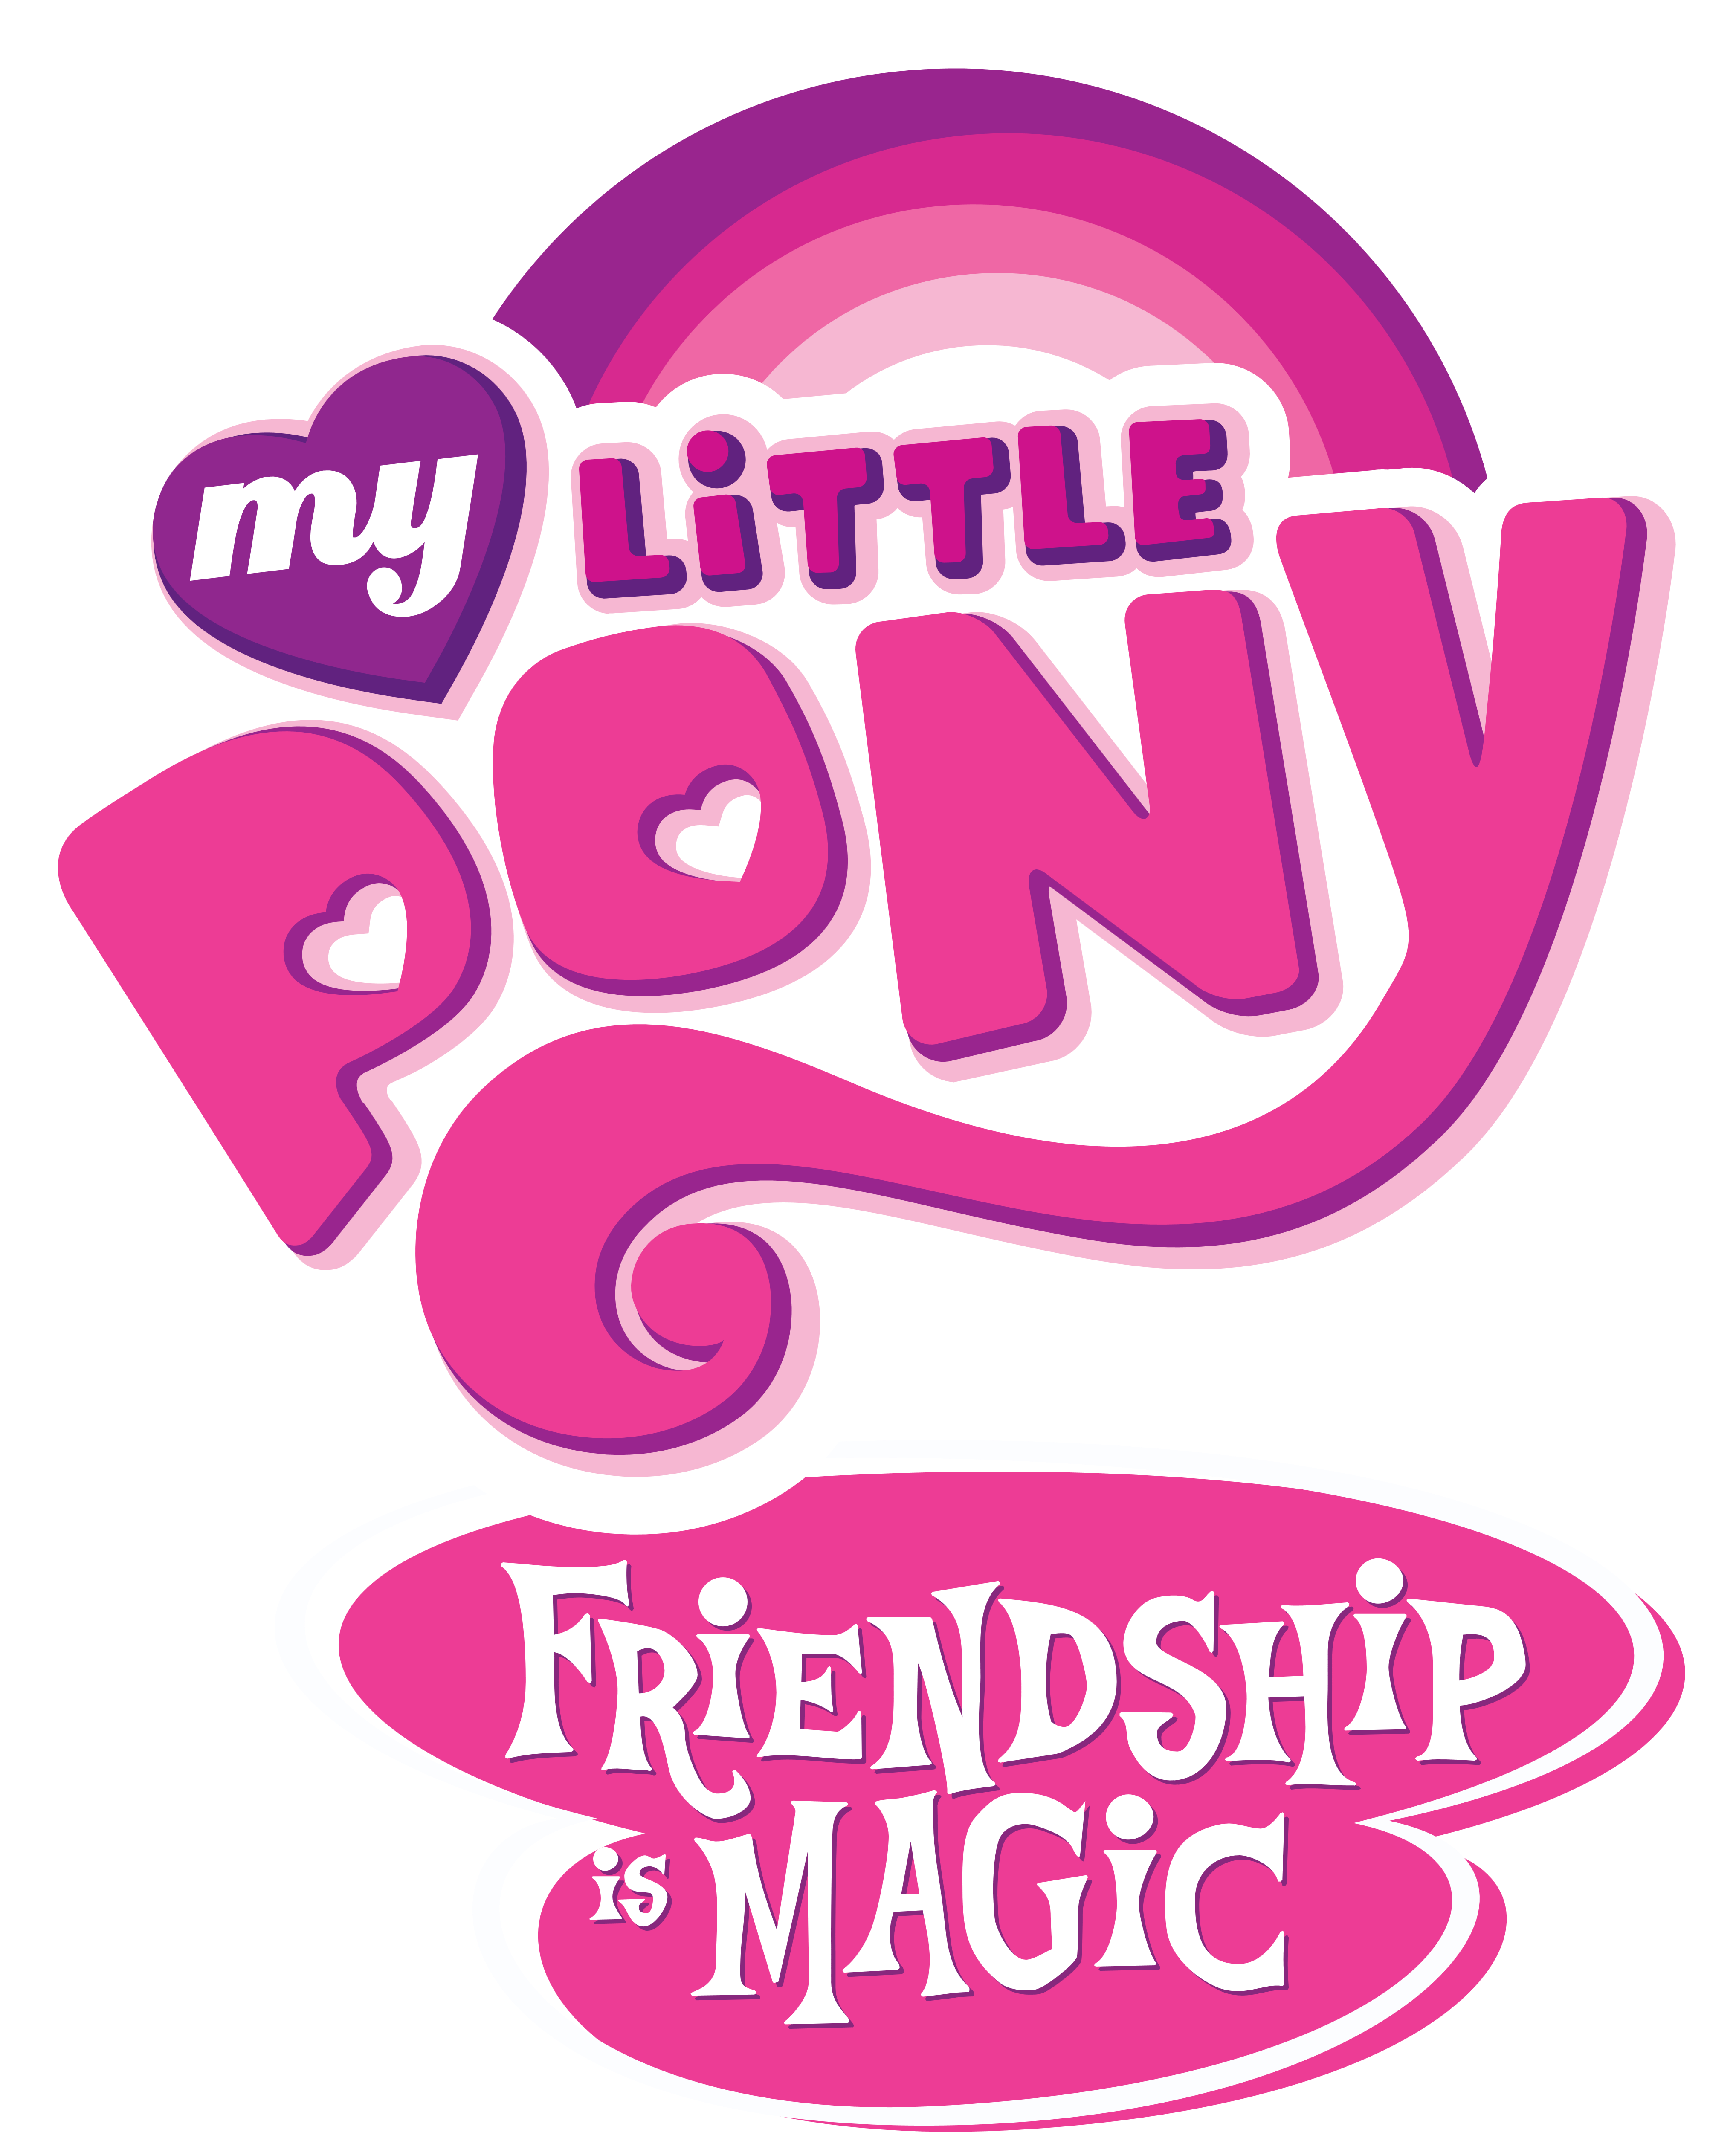 My Little Pony Friendship is Magic - Logos Download